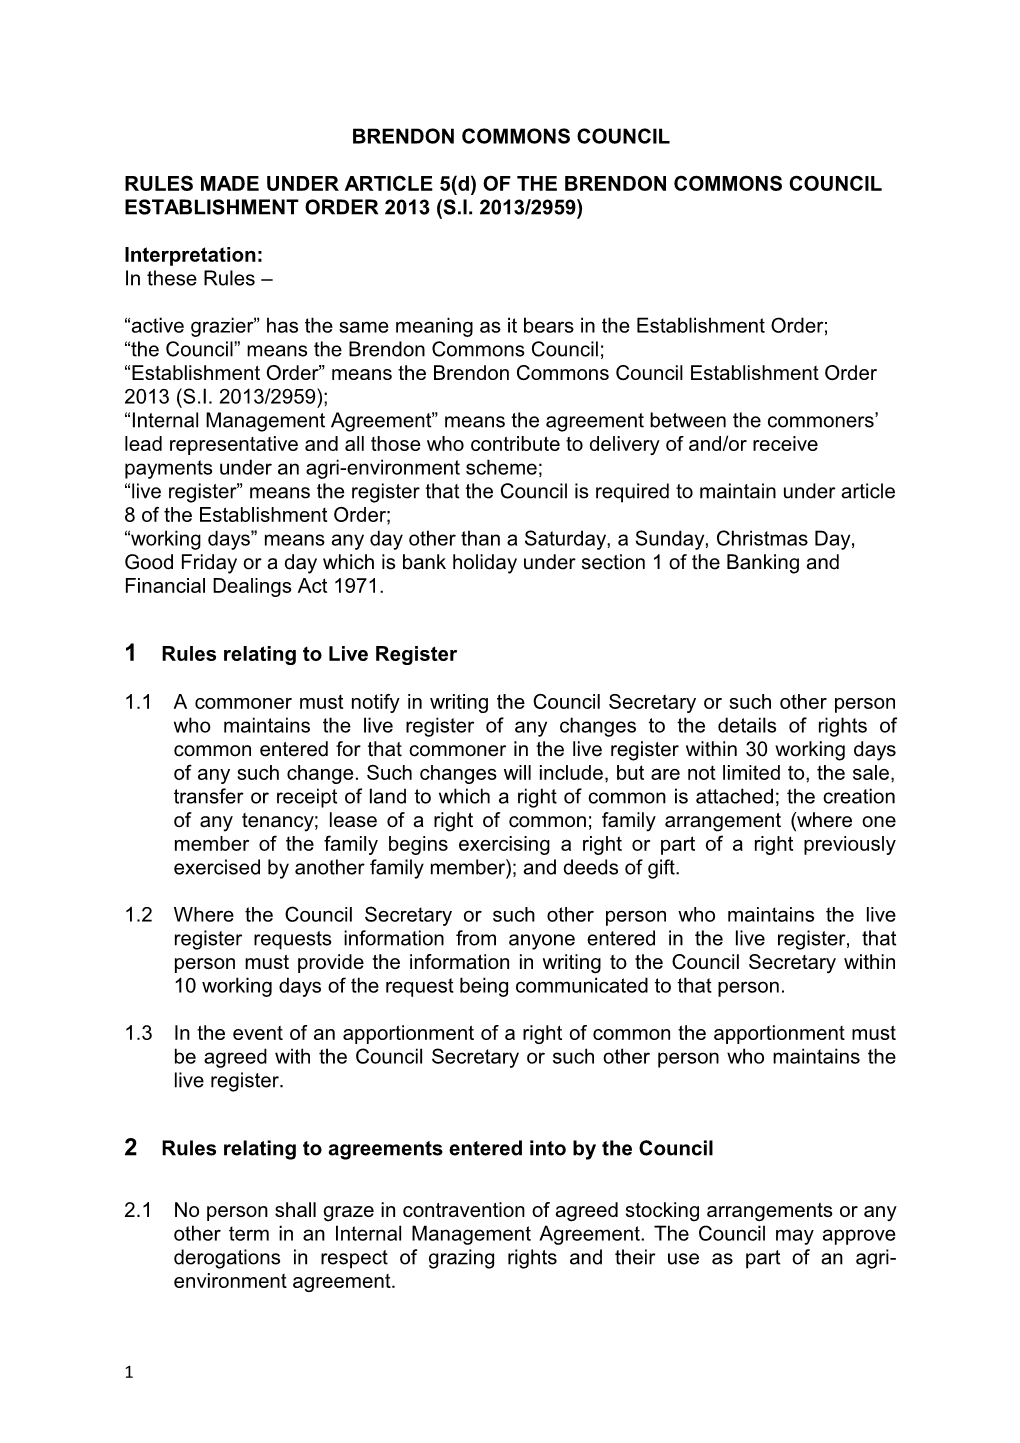 RULES MADE UNDER ARTICLE 5(D) of the BRENDON COMMONS COUNCIL ESTABLISHMENT ORDER 2013